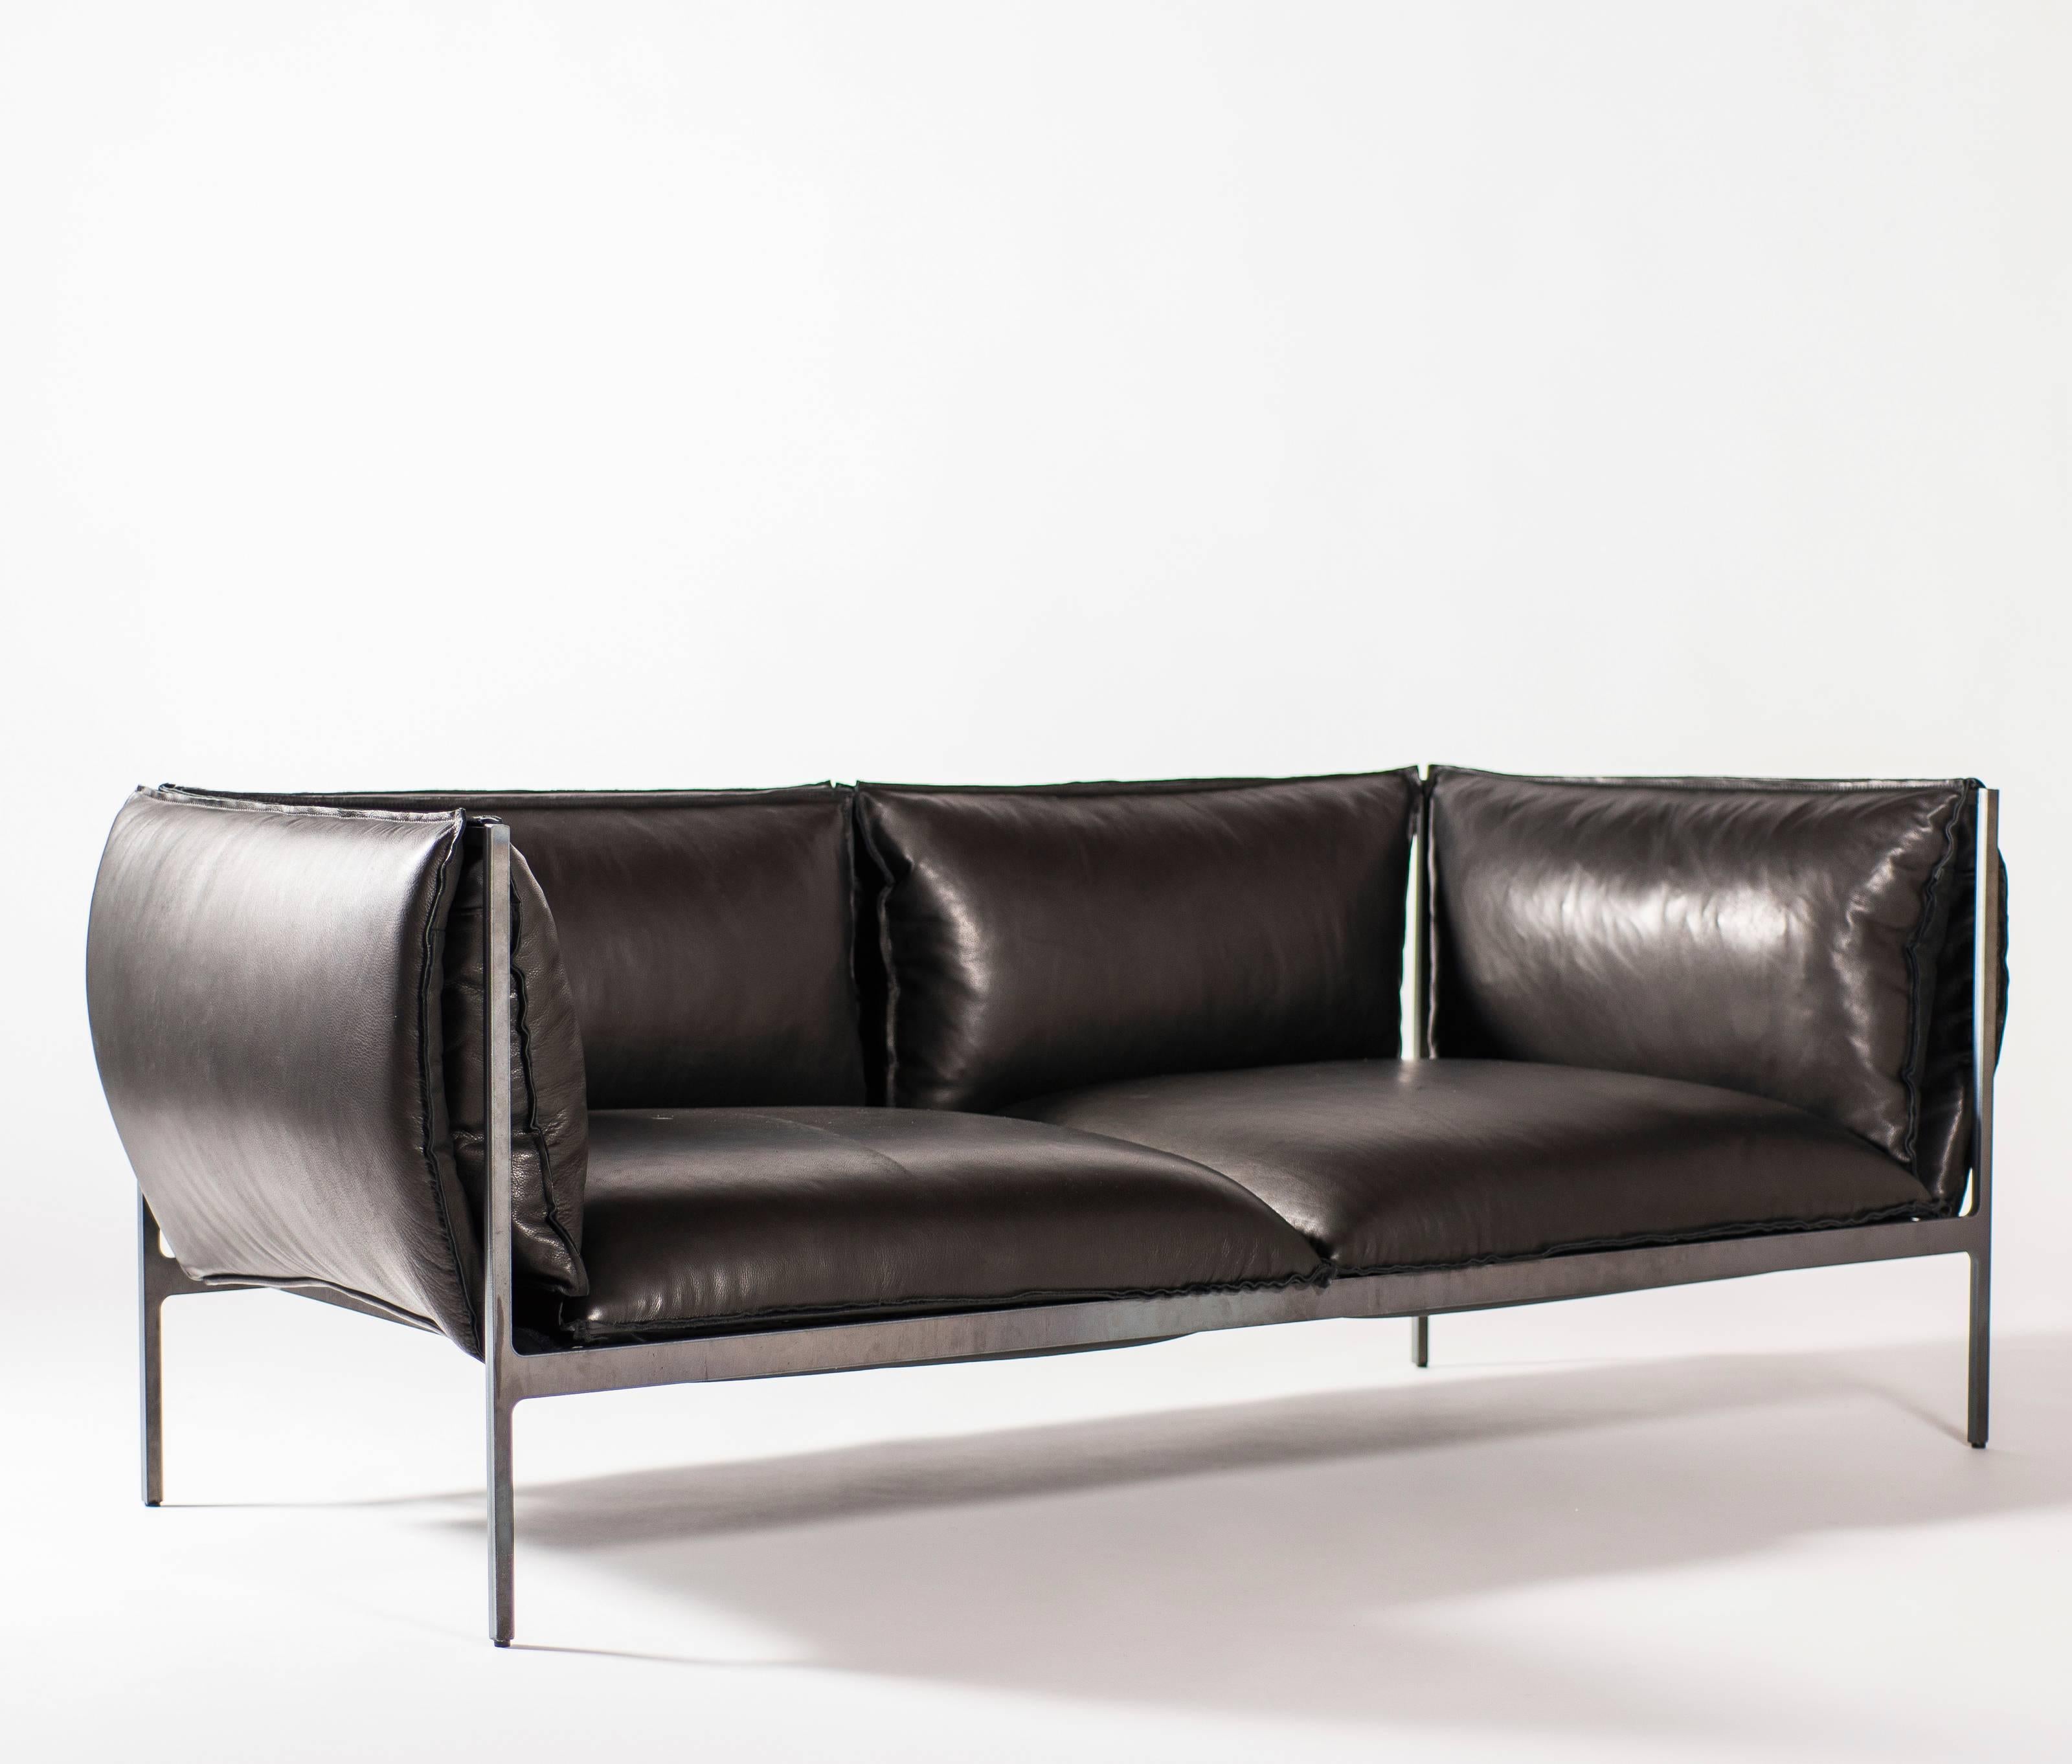 The sofa double is guilty as charged. Doubling the fun of Klein Agency's sofa Single, this contemporary piece is utilizing the same bulging pillow forms. The double allows ample room to kick your legs up or stretch your body out. The cushions,